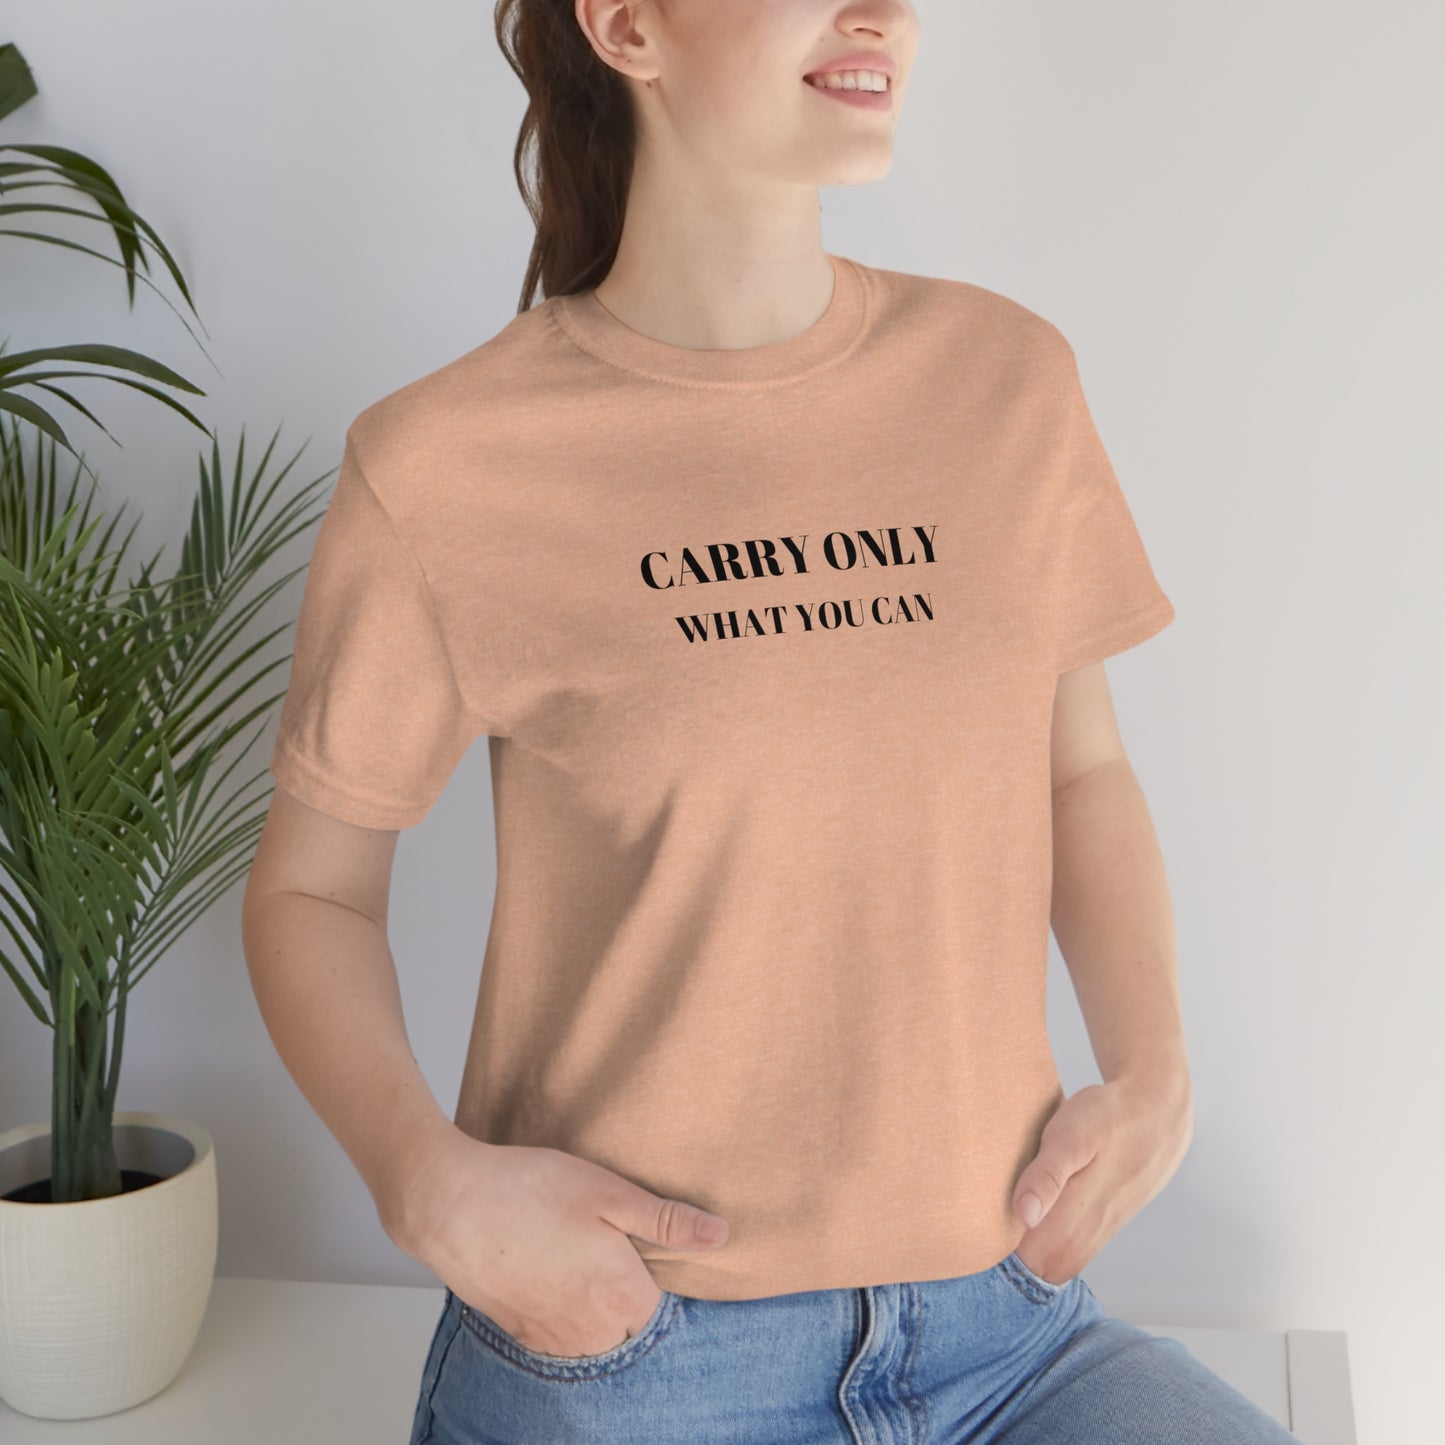 Carry only what you can t shirt gift, Tshirt gift with inspirational words, T shirt gift for family and friends